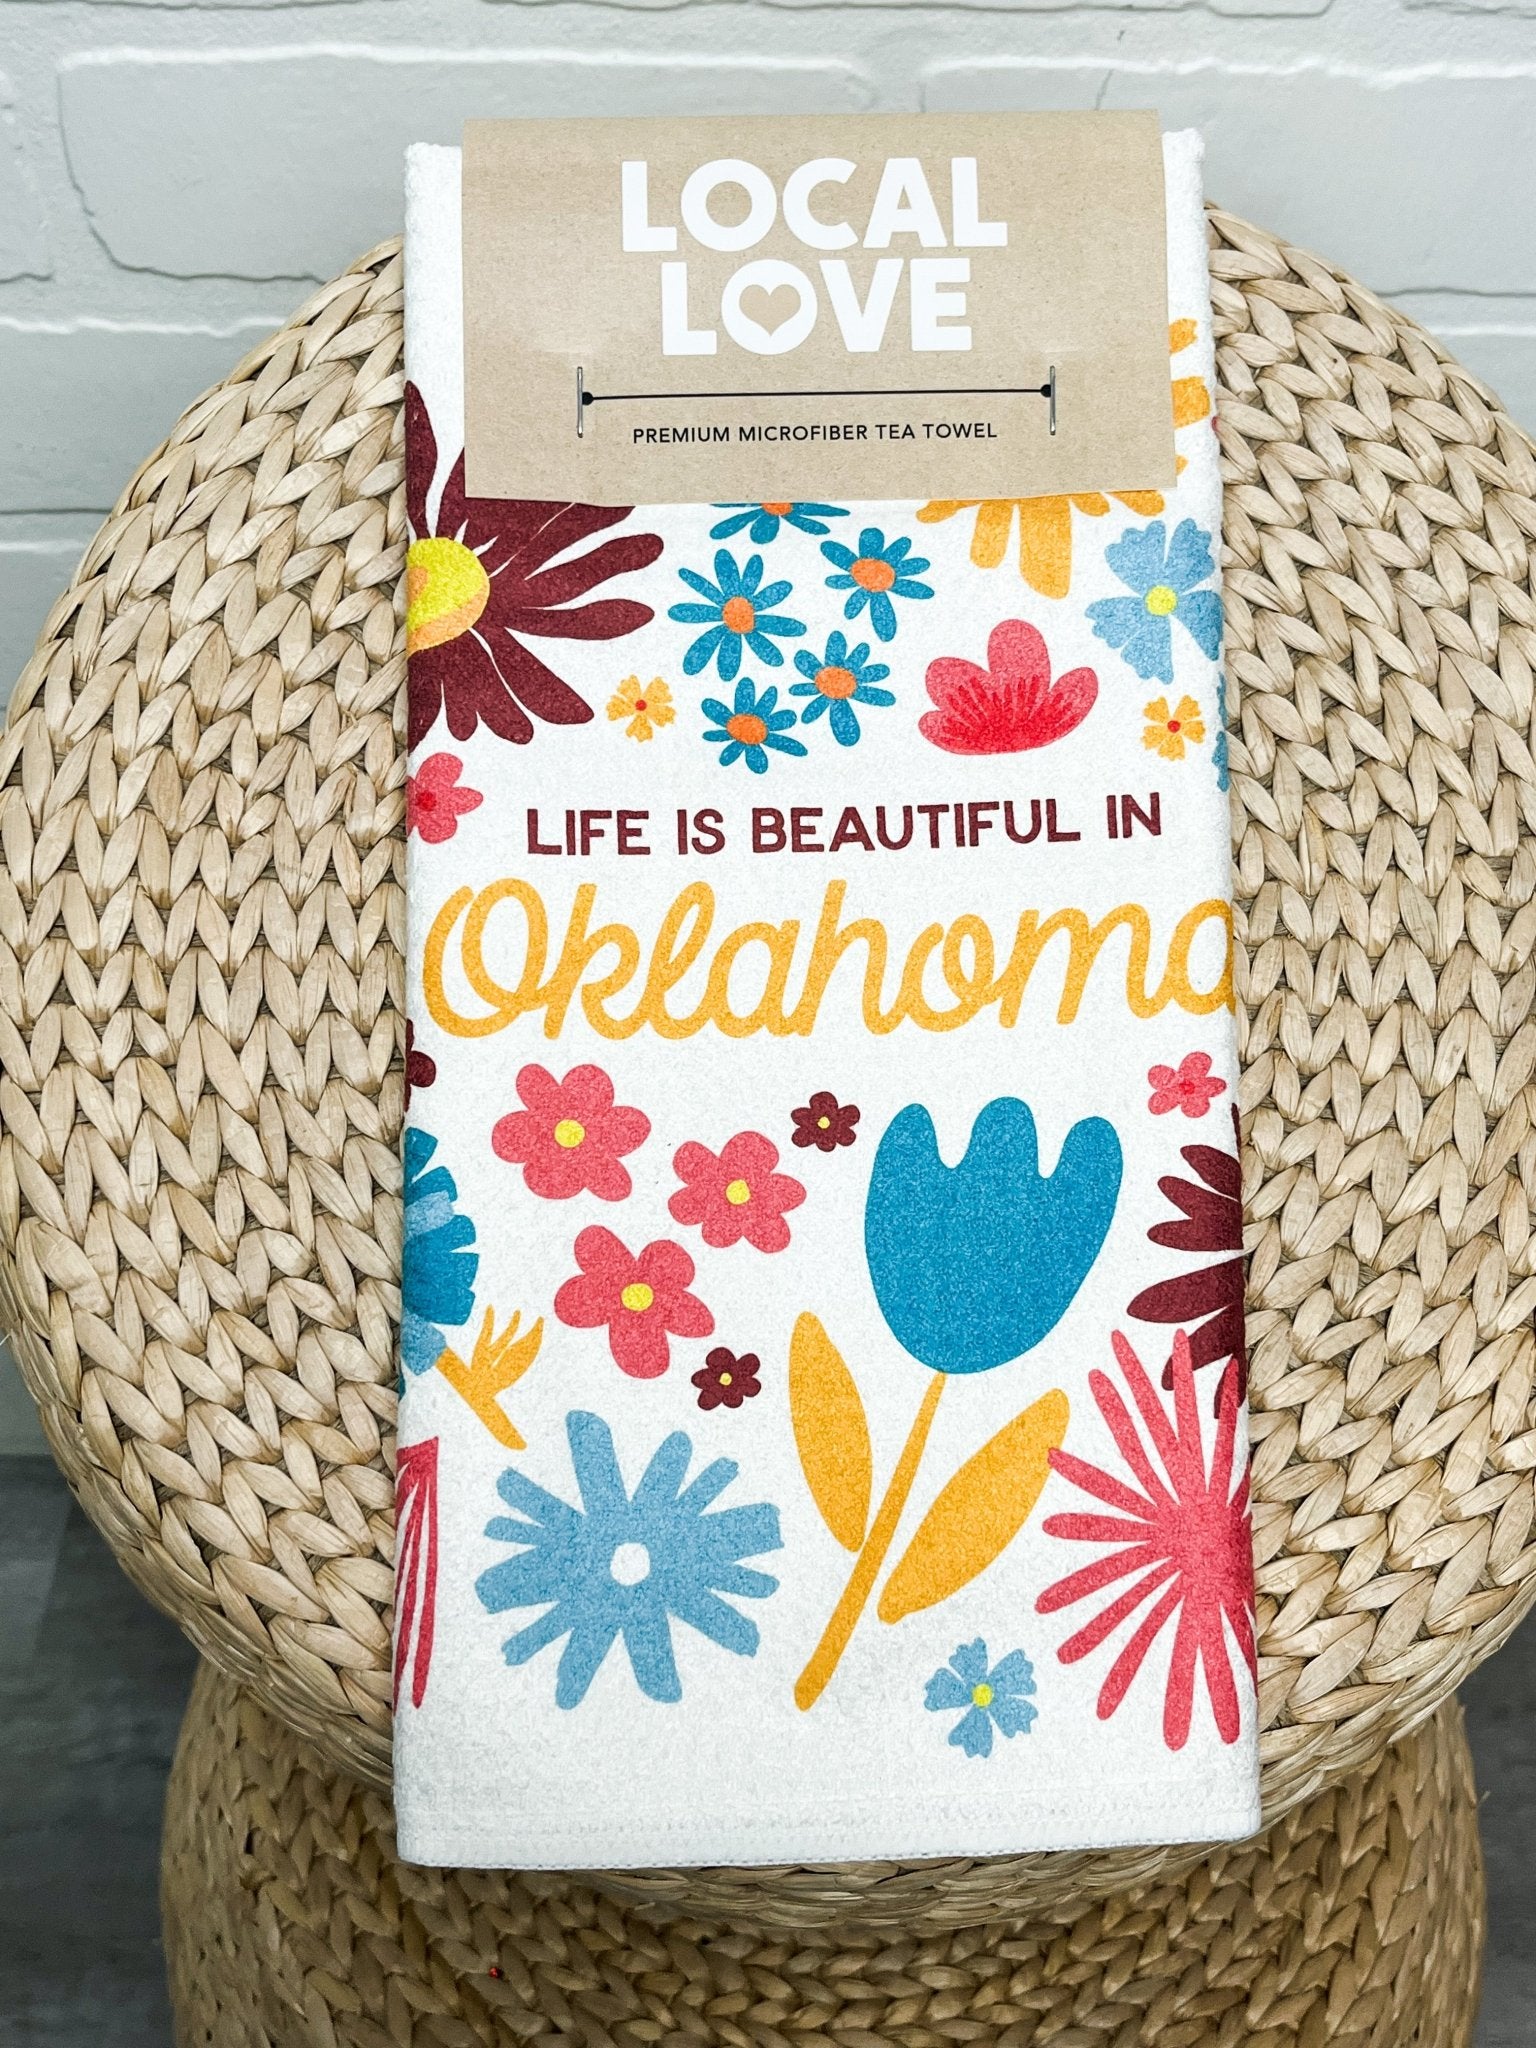 Life is beautiful in Oklahoma tea towel - Trendy Gifts at Lush Fashion Lounge Boutique in Oklahoma City